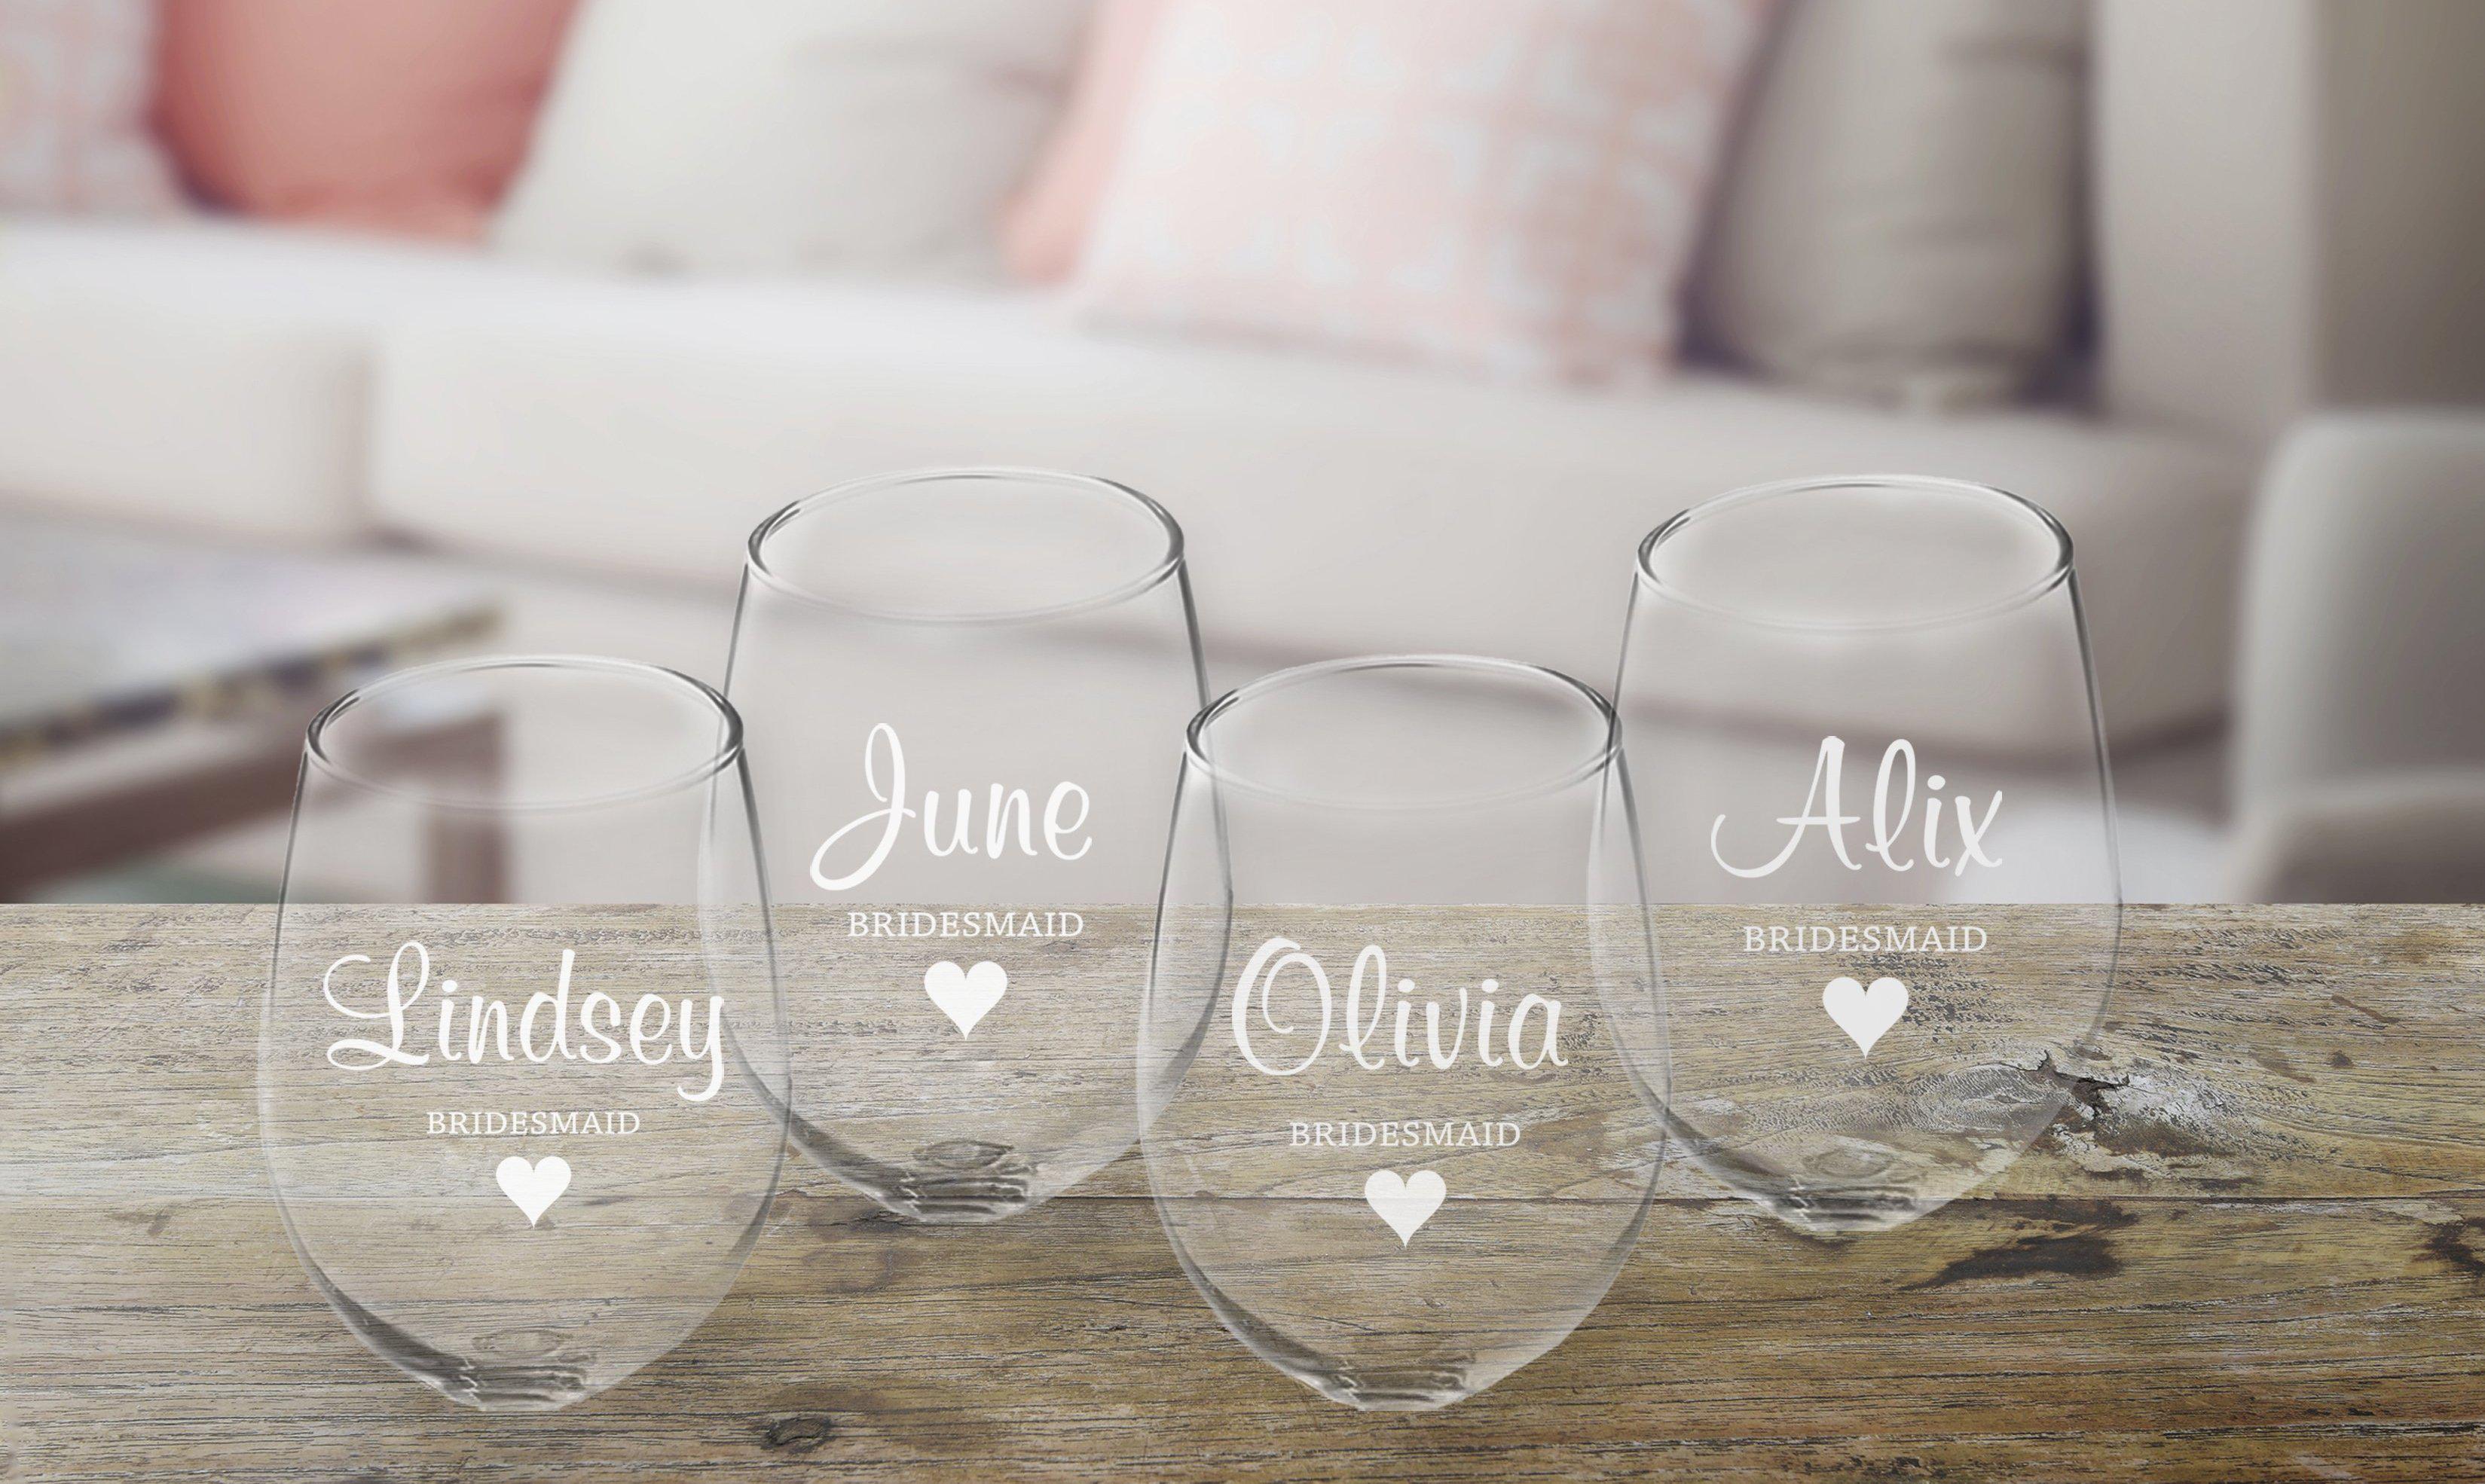 Custom Wine glass custom gifts custom wine glasses bridal party gifts wine glass bridesmaid proposal bridesmaid gifts custom cups